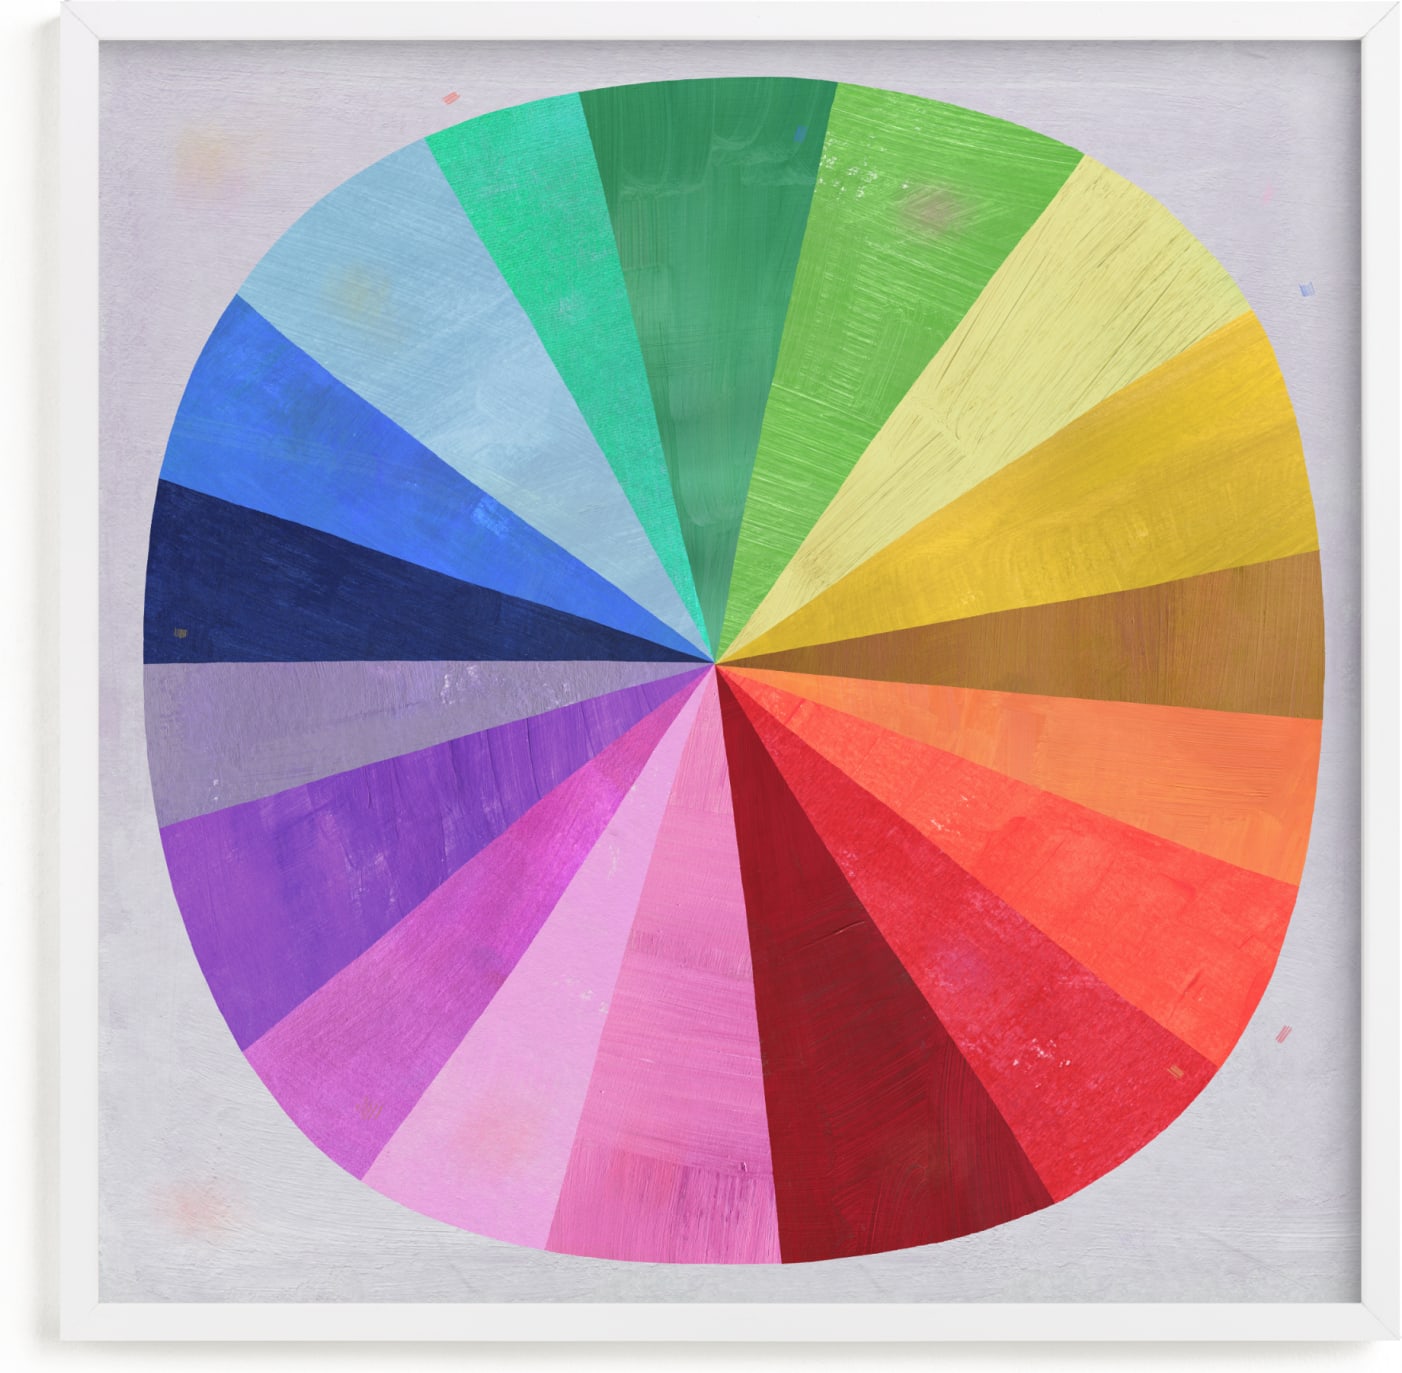 This is a colorful kids wall art by melanie mikecz called Color Wheel.